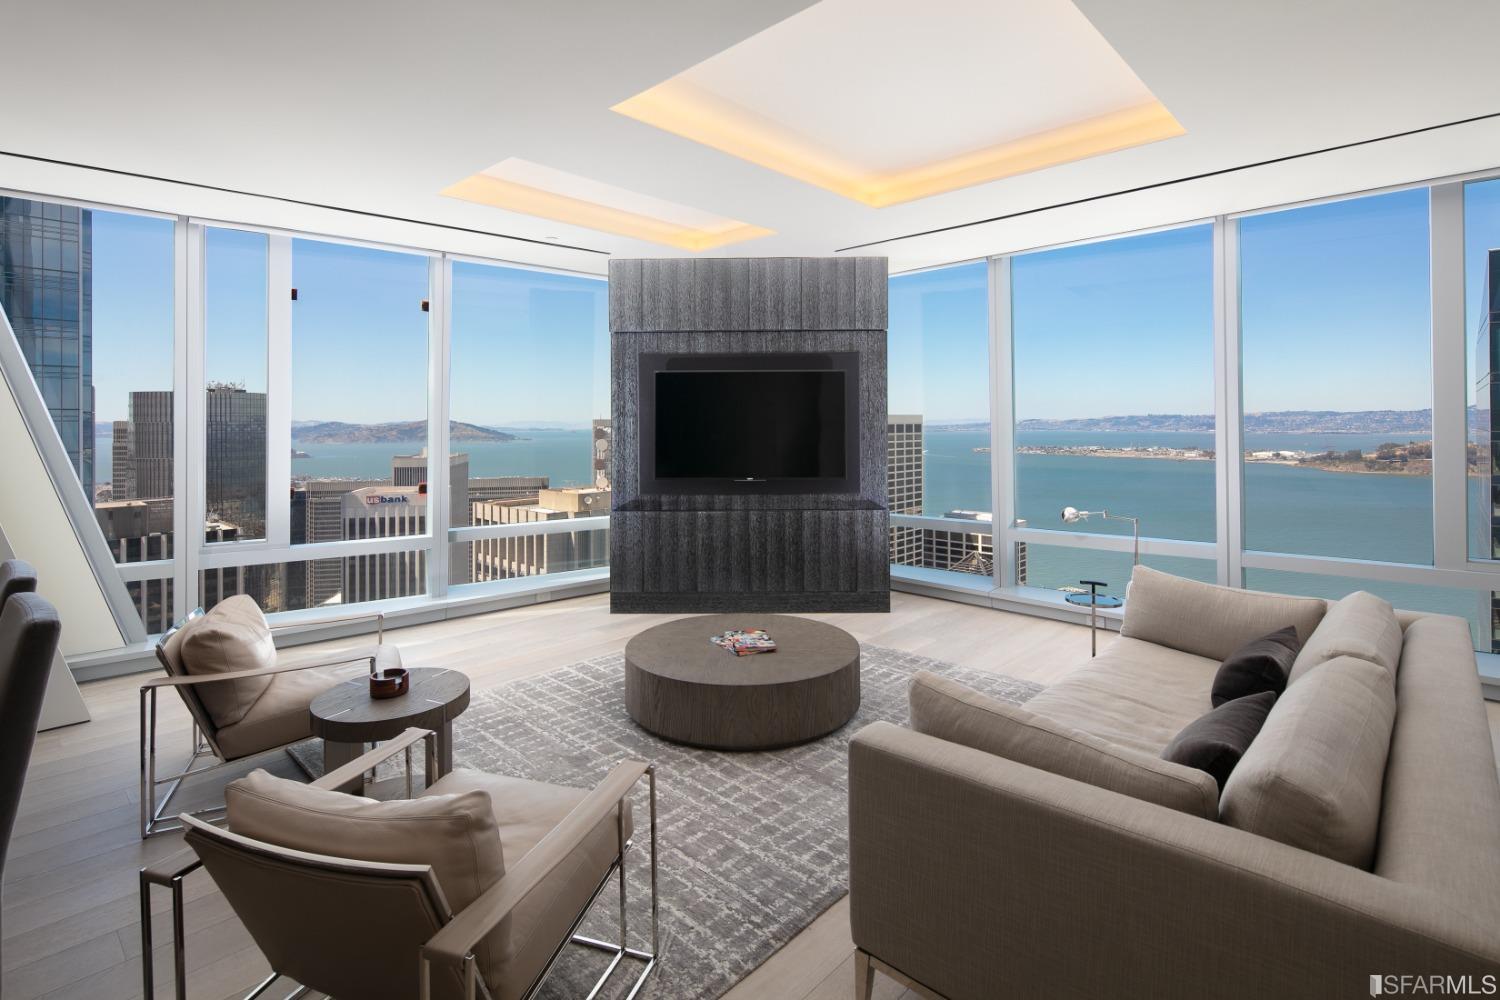 One of only 55 extraordinary residences designed by Orlando Diaz-Azcuy for 181 Fremont, #58A bestows mesmerizing north & east Bay and Skyline views to highlight its ideal 2BD + office layout. Featuring kitchen and baths designed with the most elegant materials and finishes ever delivered in downtown San Francisco and towering 9'-9'6 ceiling heights with cove soffit lighting, this 1,926sf corner condominium has it all! Residents enjoy the undivided attention of 181 Fremont's world-class staff: the Concierge Team, Valet and Lobby Hosts ensure residents are well attended. Occupying the complete 52nd floor of 181 Fremont, the Amenities Level boasts an unrivaled Residence Lounge, wrap-around Observation Terrace, Fitness Center, Bar & Catering Center, Library, and Conference Room. Positioned on a prime block in San Francisco's technology and financial centers, the Transbay Terminal & Rooftop Park, the Embarcadero, Museum District & Union Square are all within a short walk.